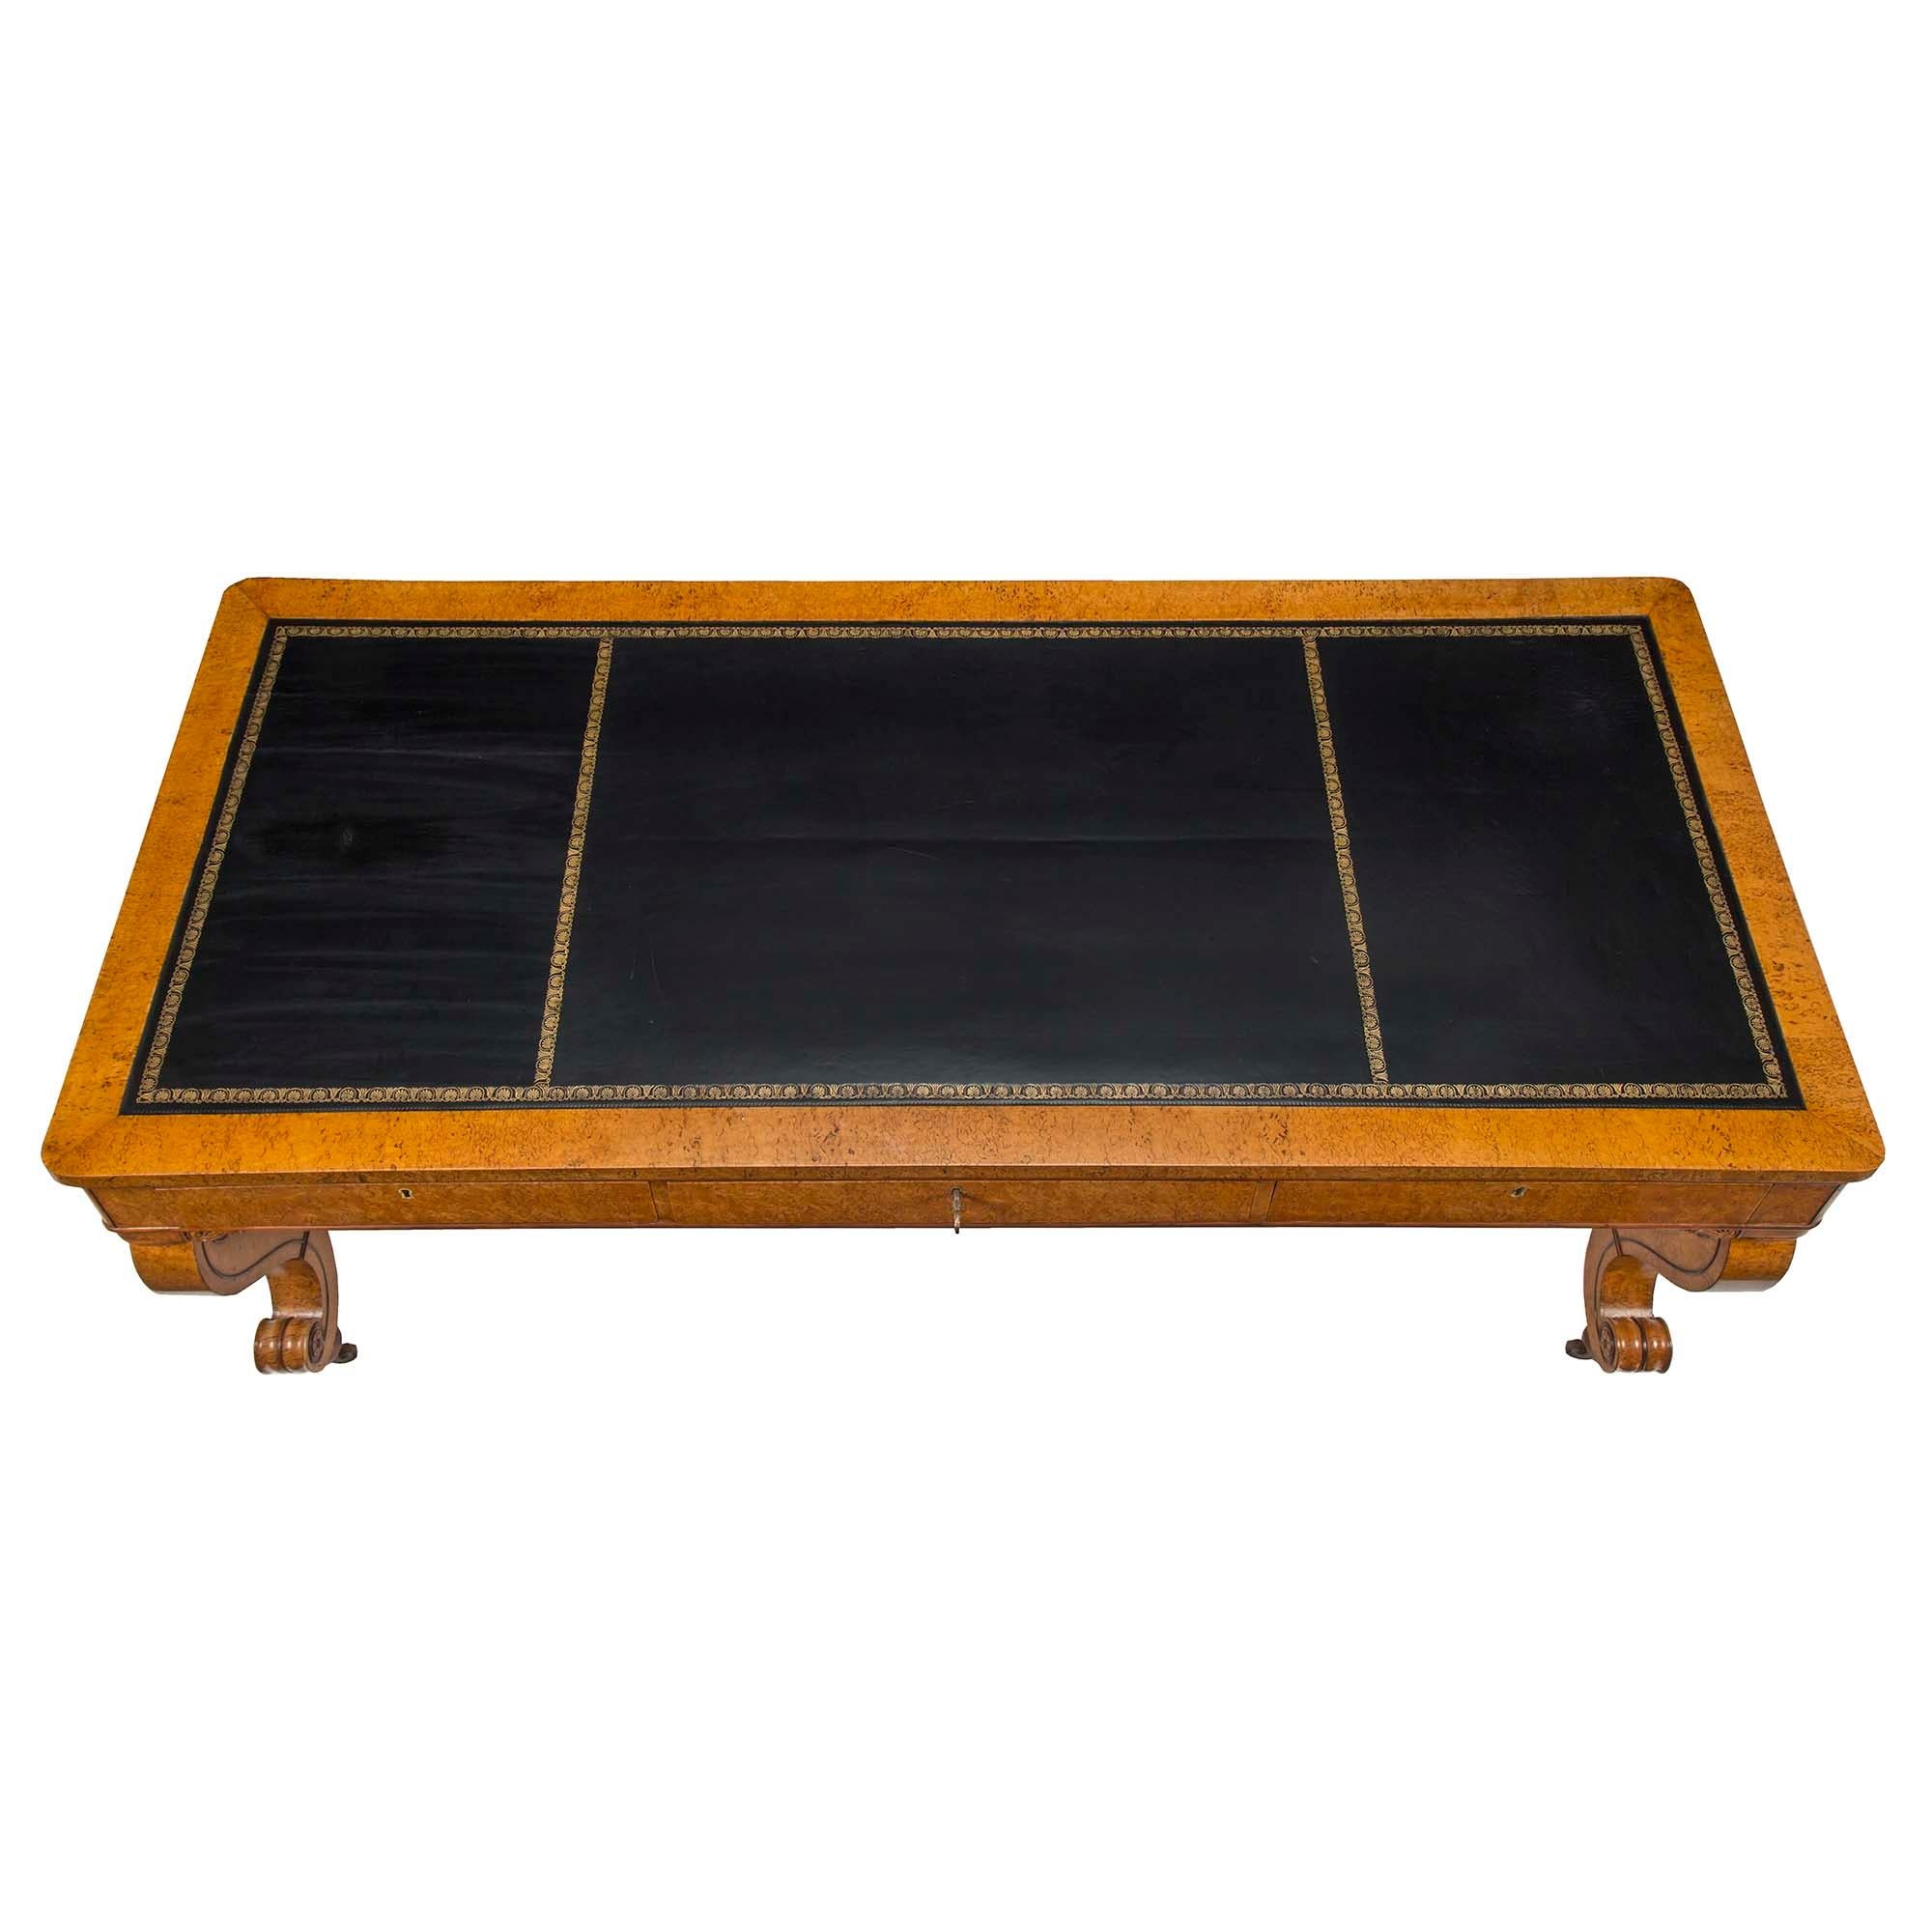 A stunning Continental 19th century Burl Maple Biedermeier center table/desk with ebonized fruitwood borders. Raised on brass casters are elegant scrolled legs rosette designs and scrolls joining them at each side. At the frieze are three wide